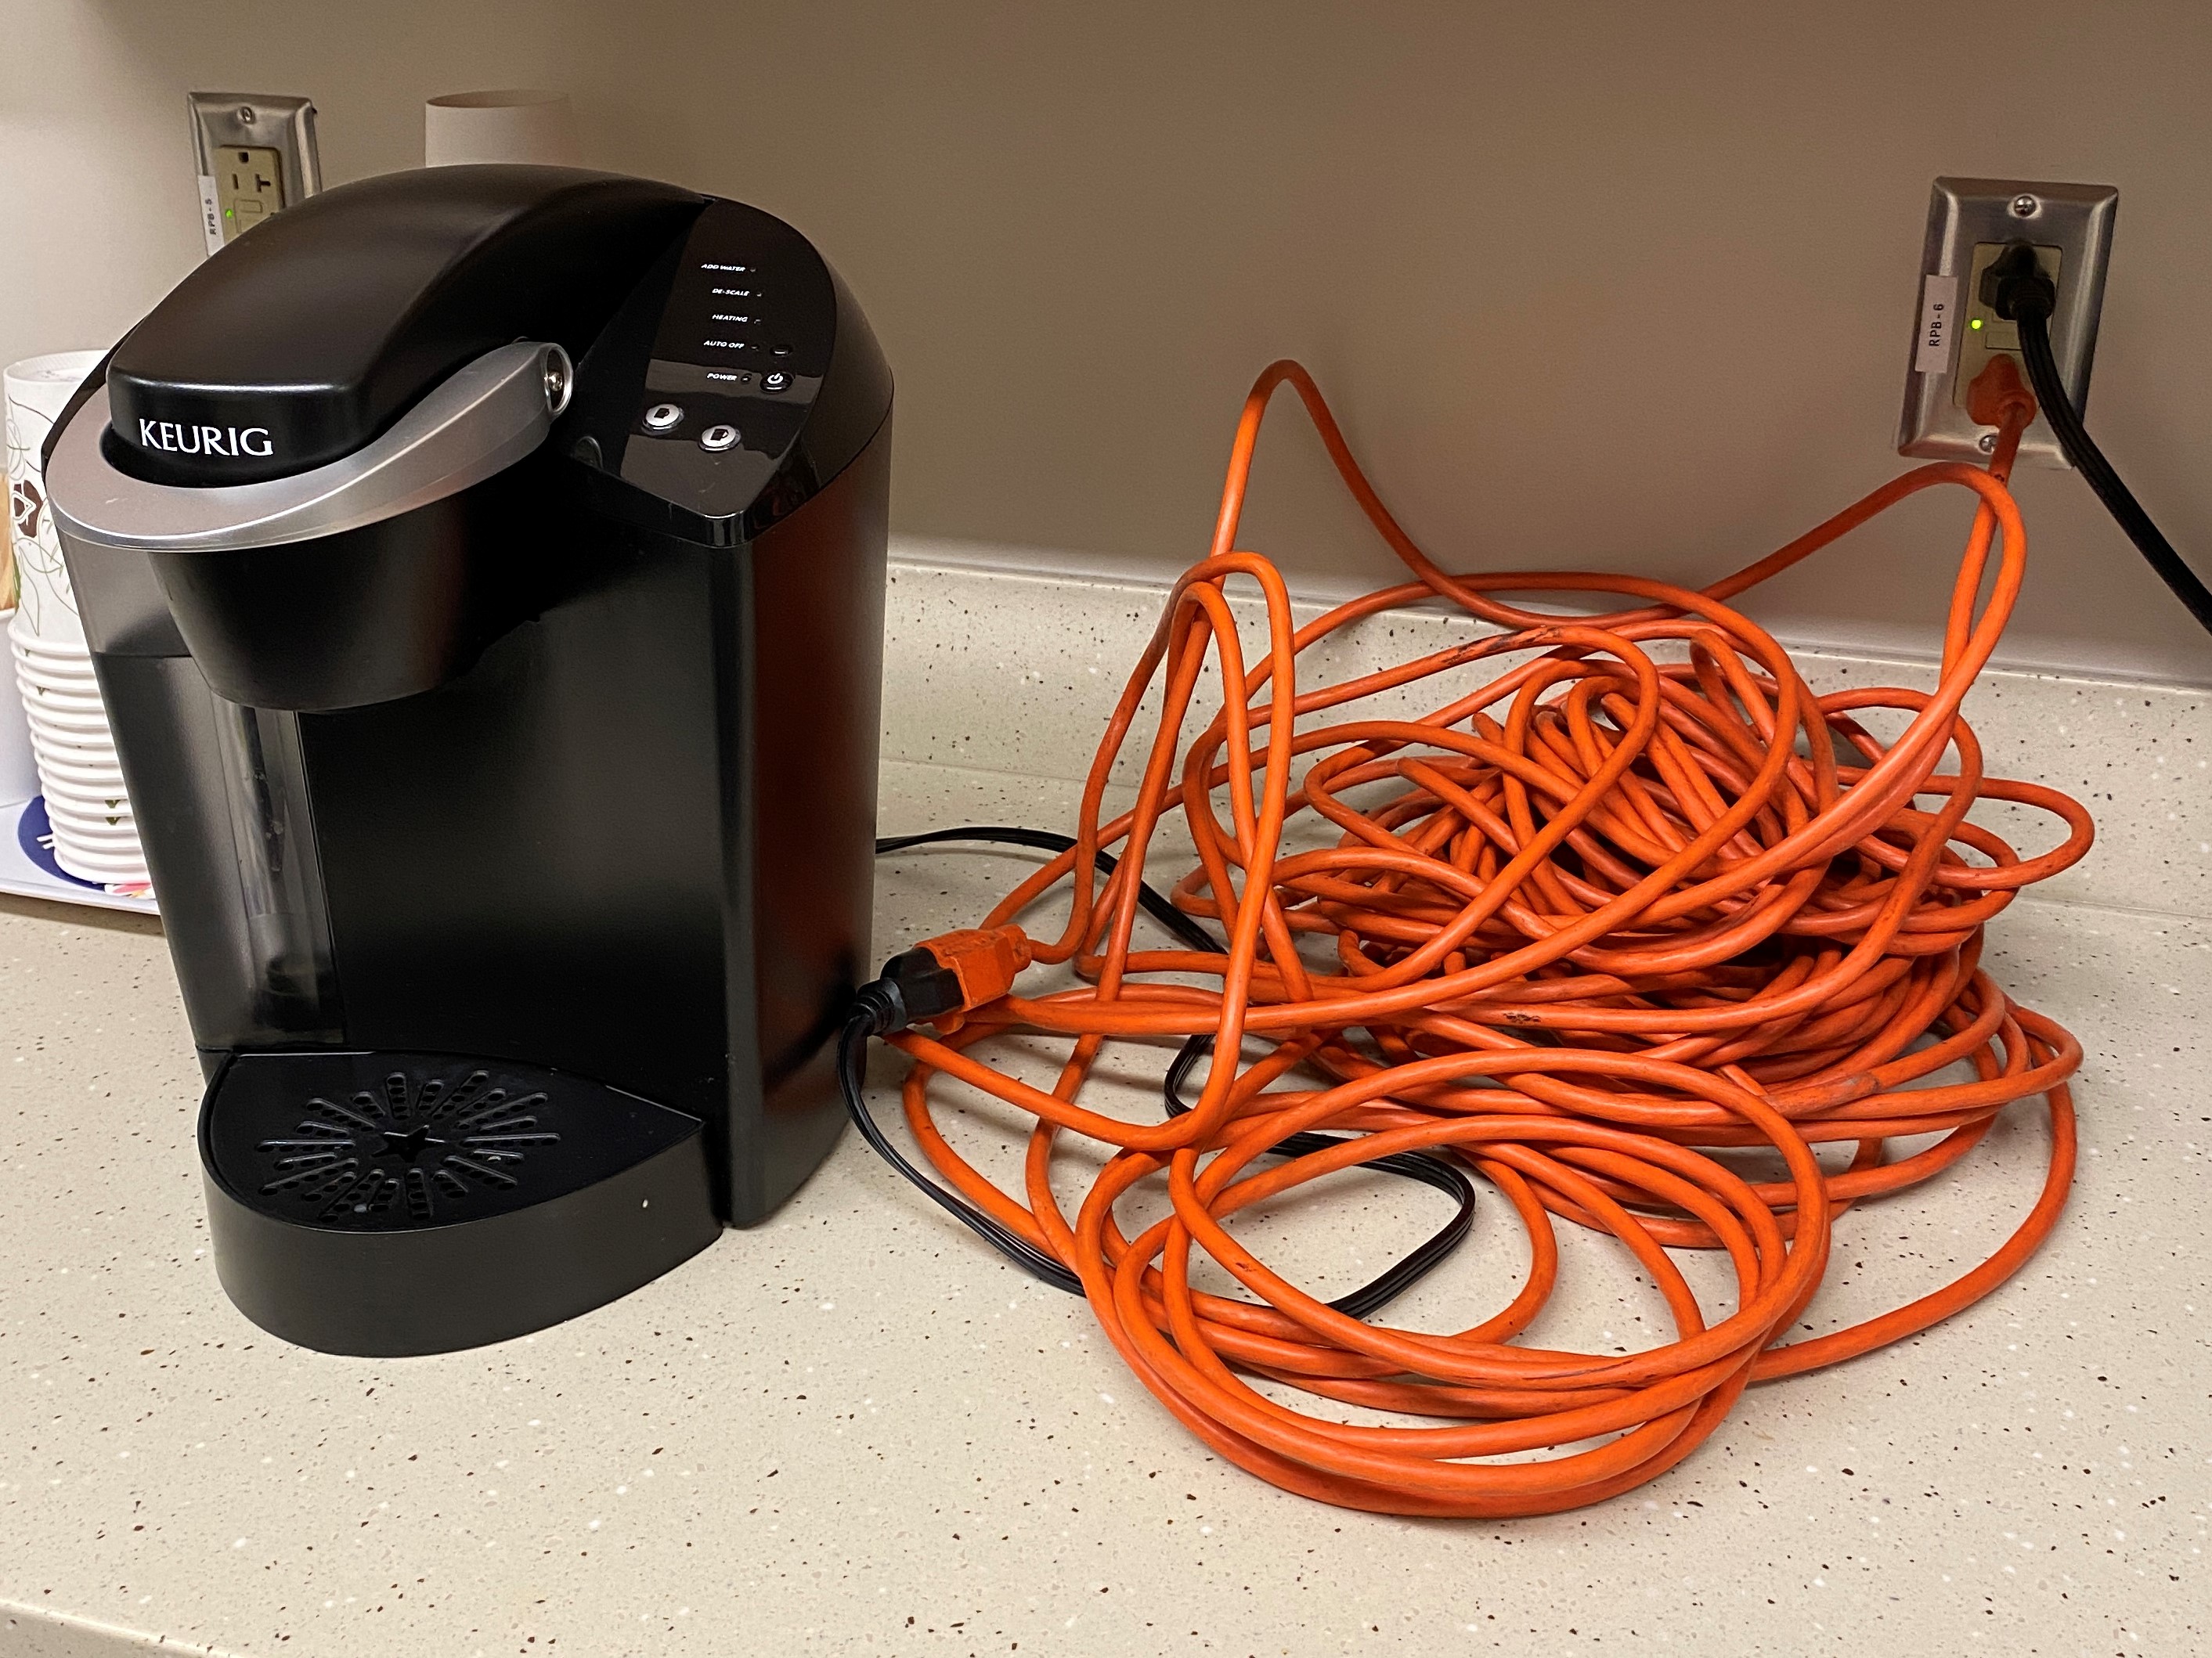 An extension cord connected to a coffee maker.